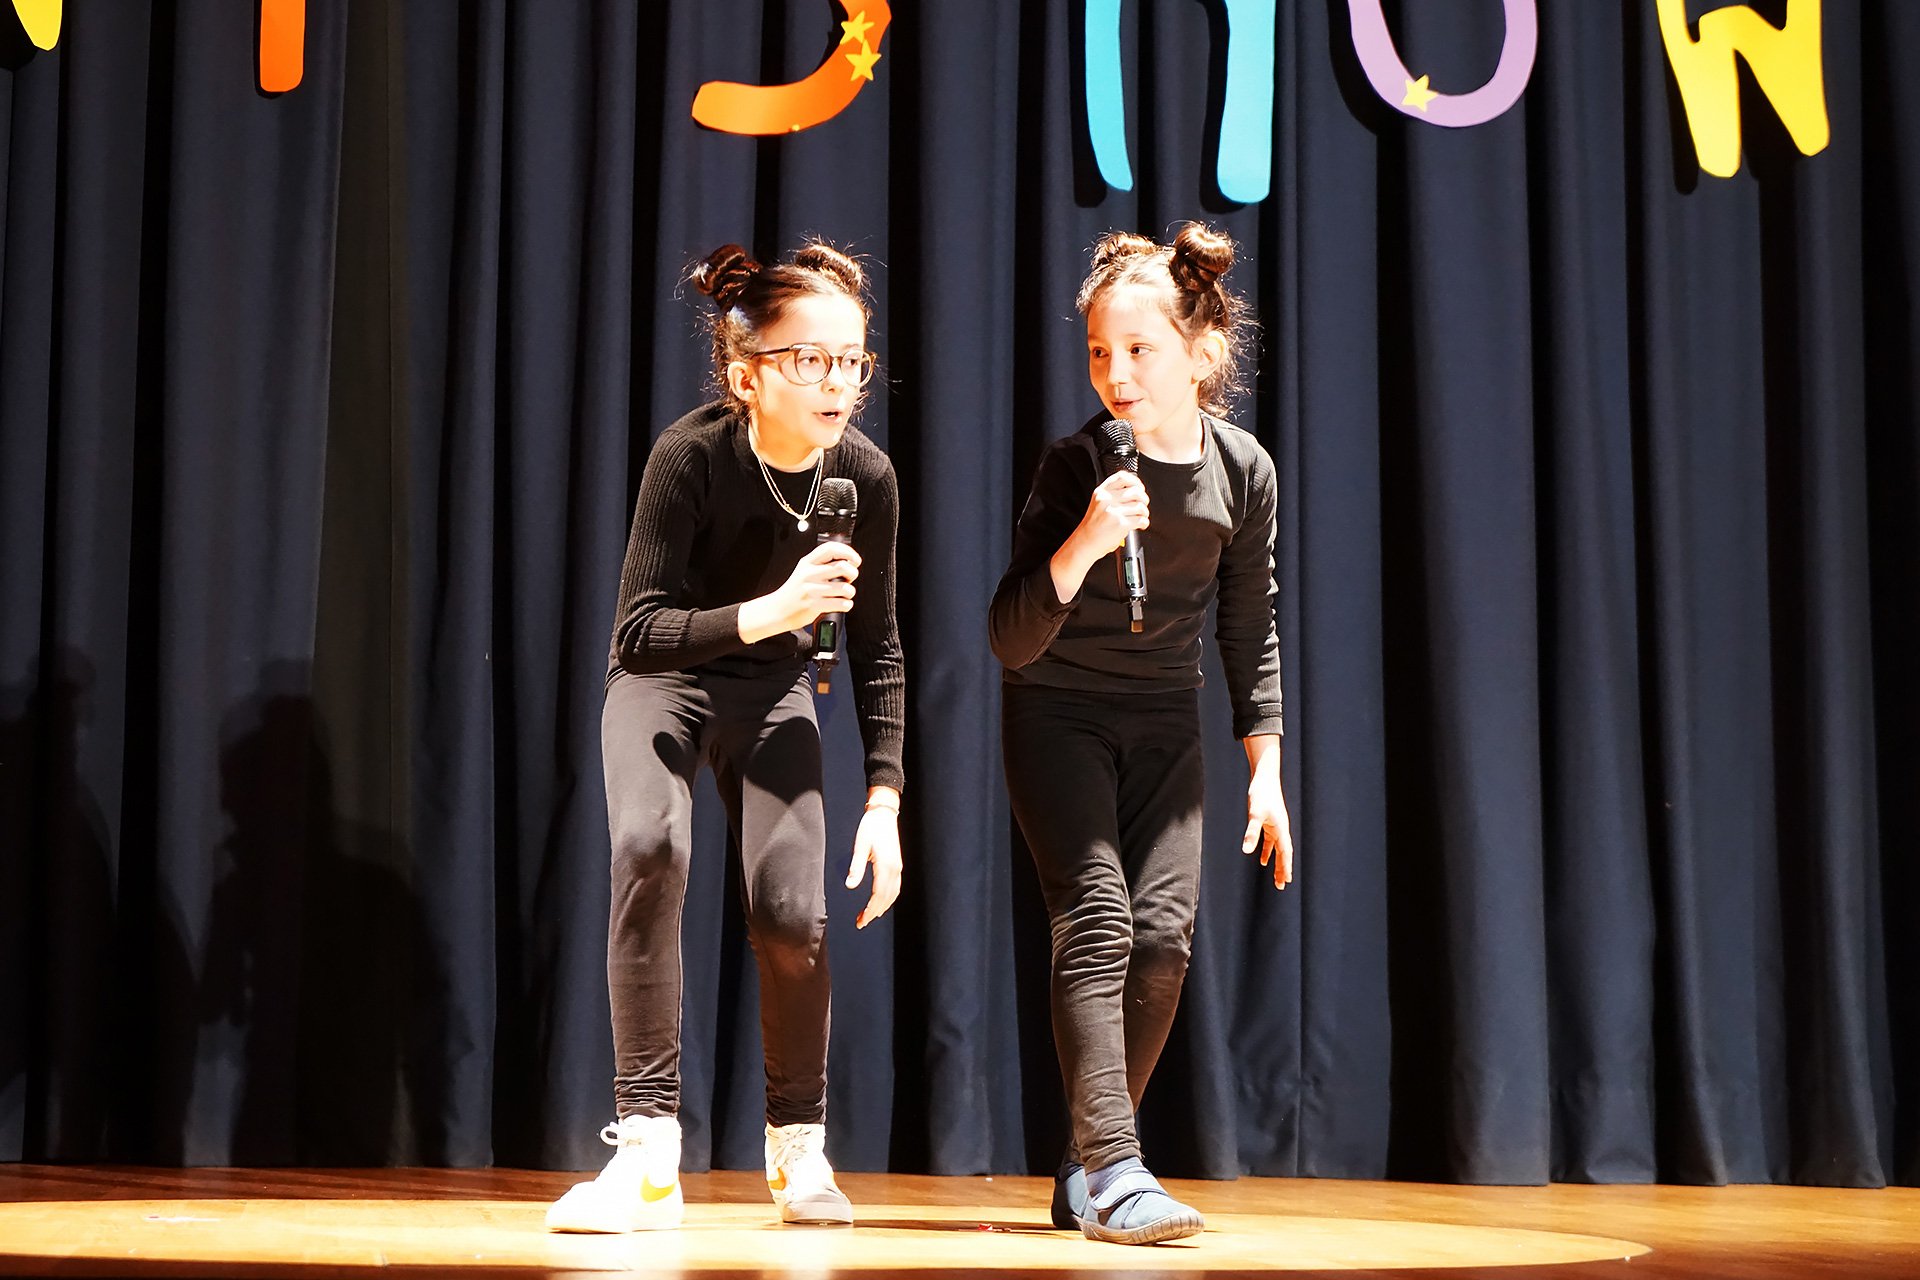 Primary Talent Show